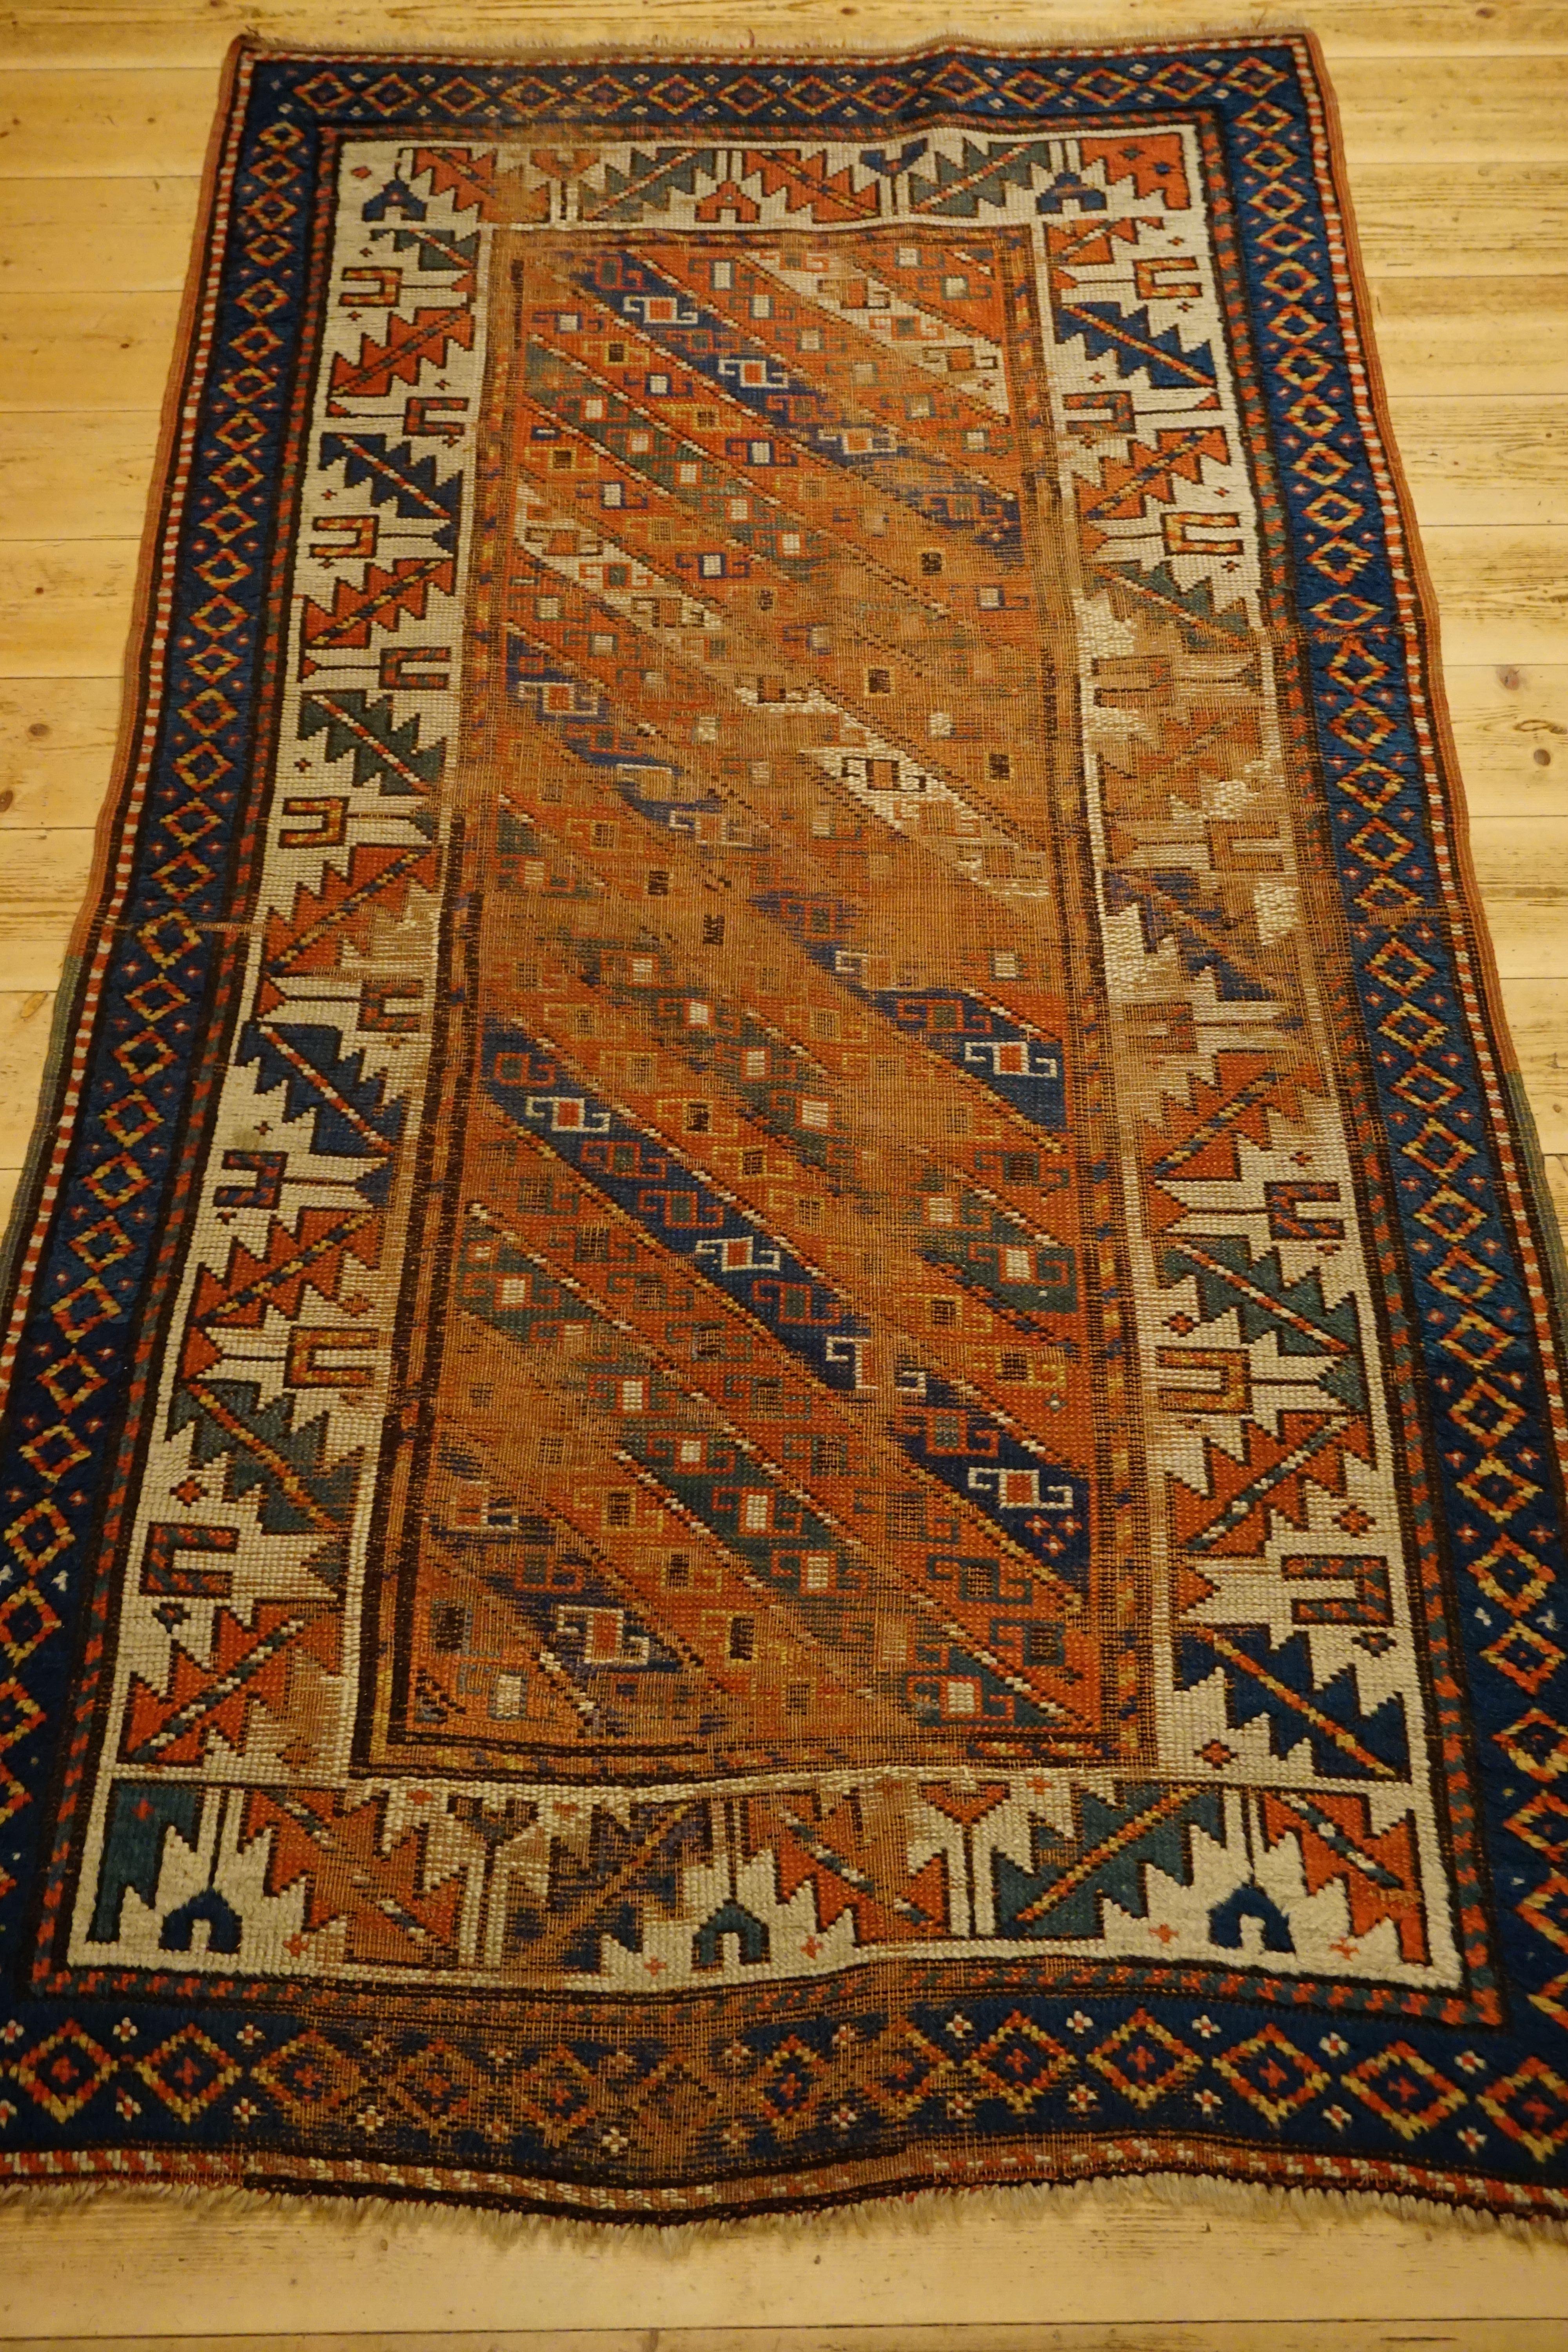 An antique Caucasian carpet
Beautifully interesting piece with bar star
Age: circa 1890.
Dimensions: about 1.00 x 1.74 meters
Material: Wool on wool with natural colors.
Condition: Relatively good for old age and okay.
Intertwining